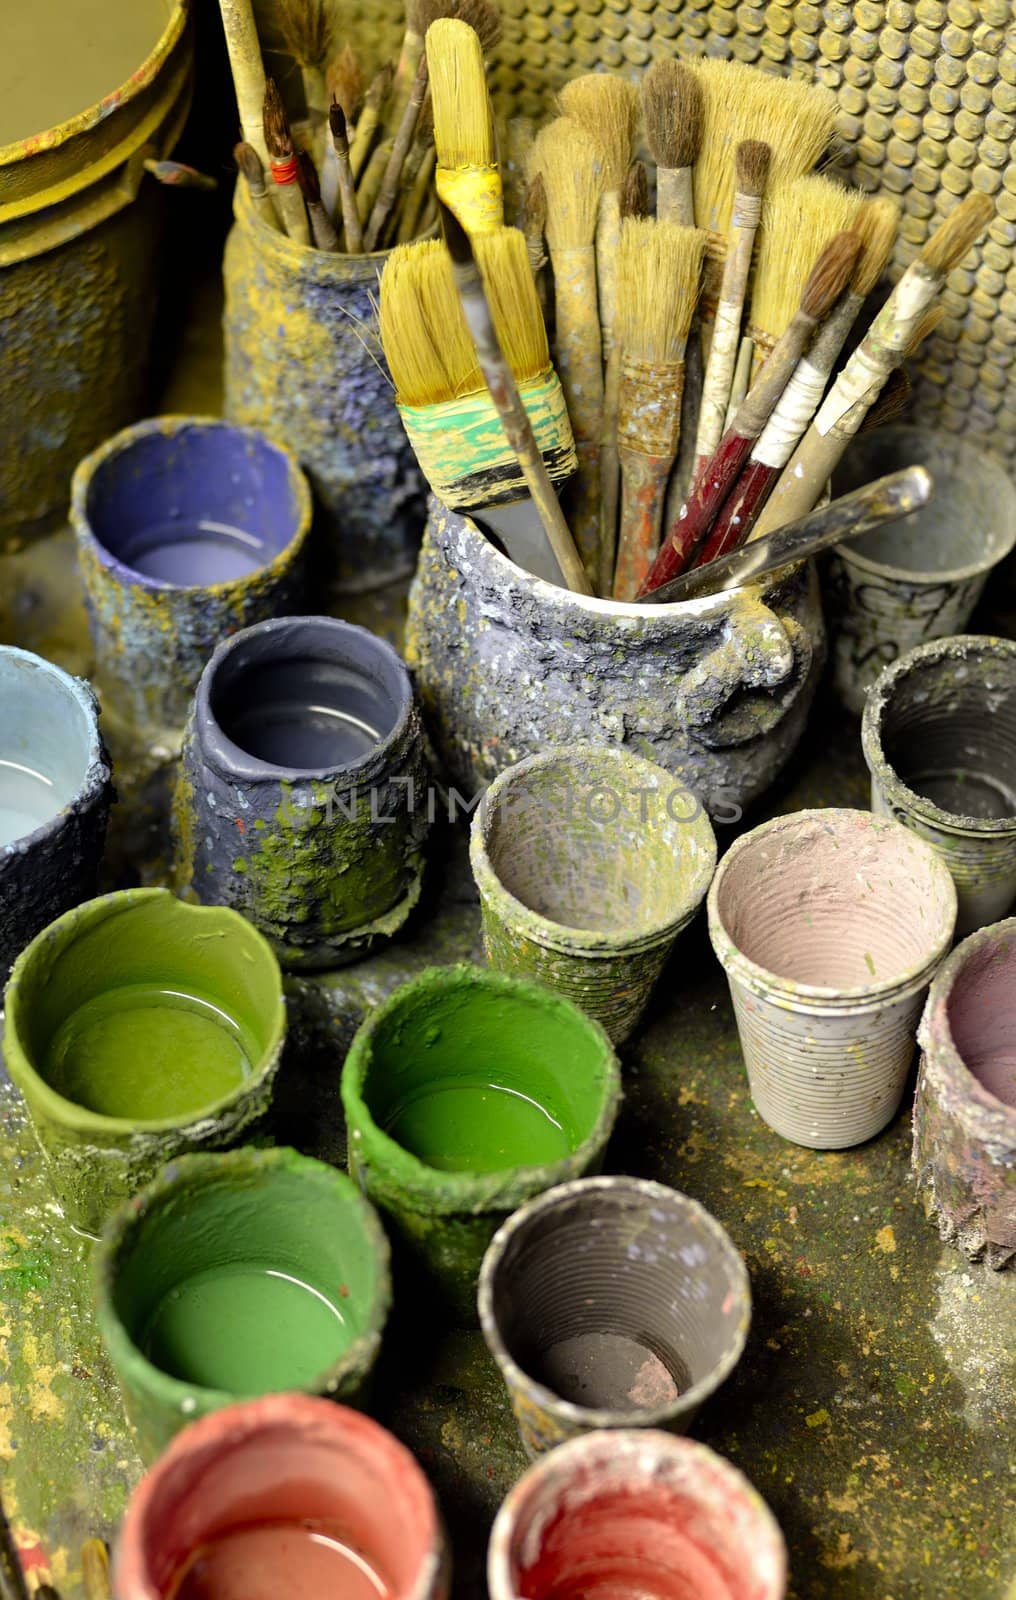 The tools for pottery's decoration in Tuscany